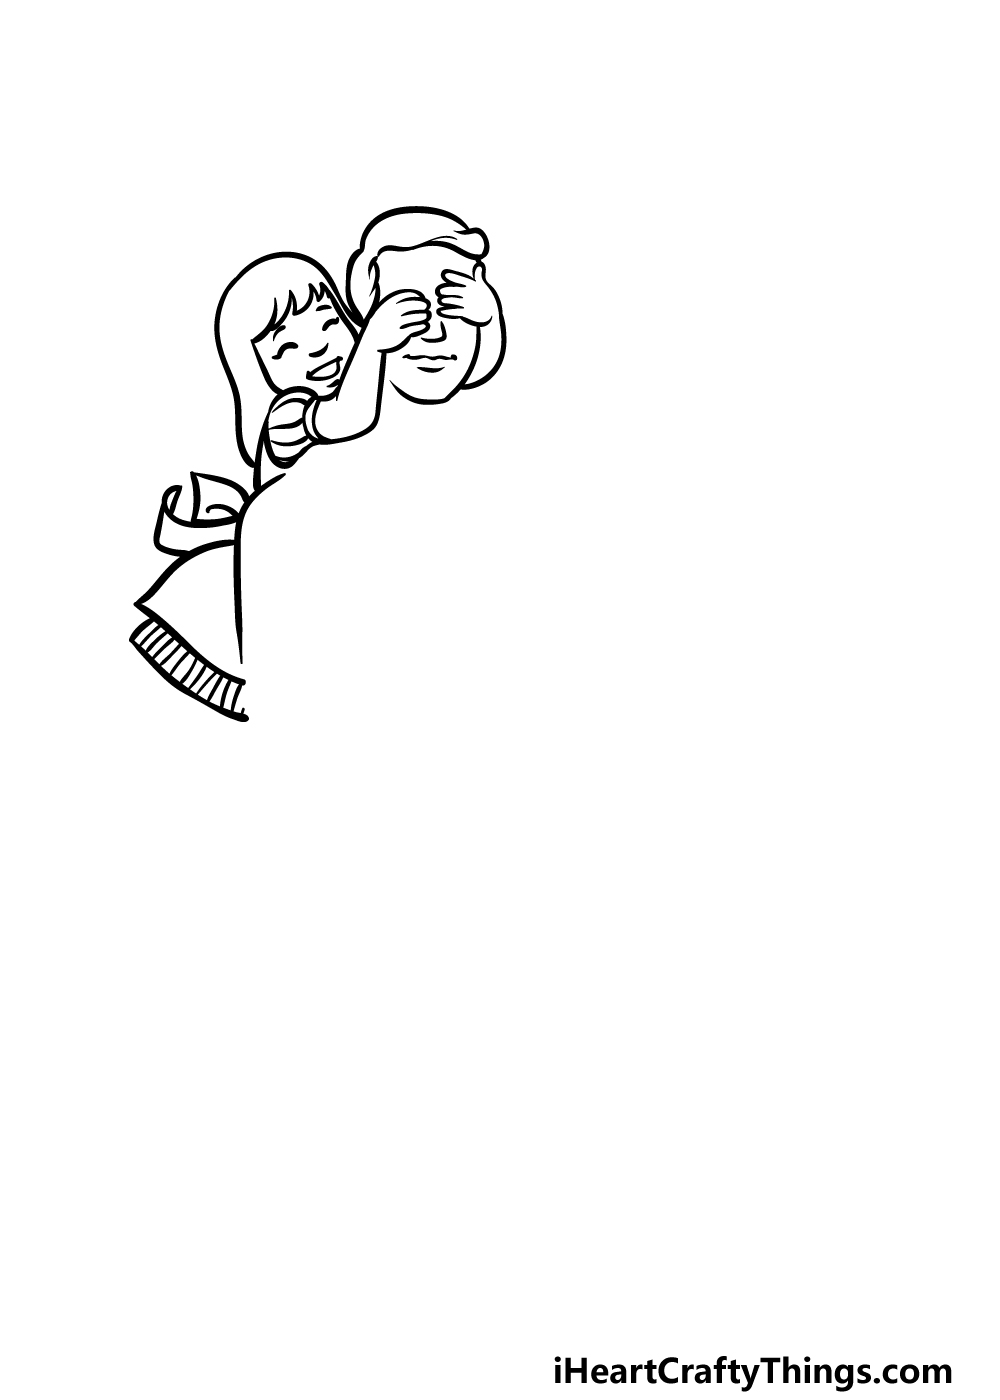 Father Daughter Line Drawing Stock Photos - 4,641 Images | Shutterstock-saigonsouth.com.vn